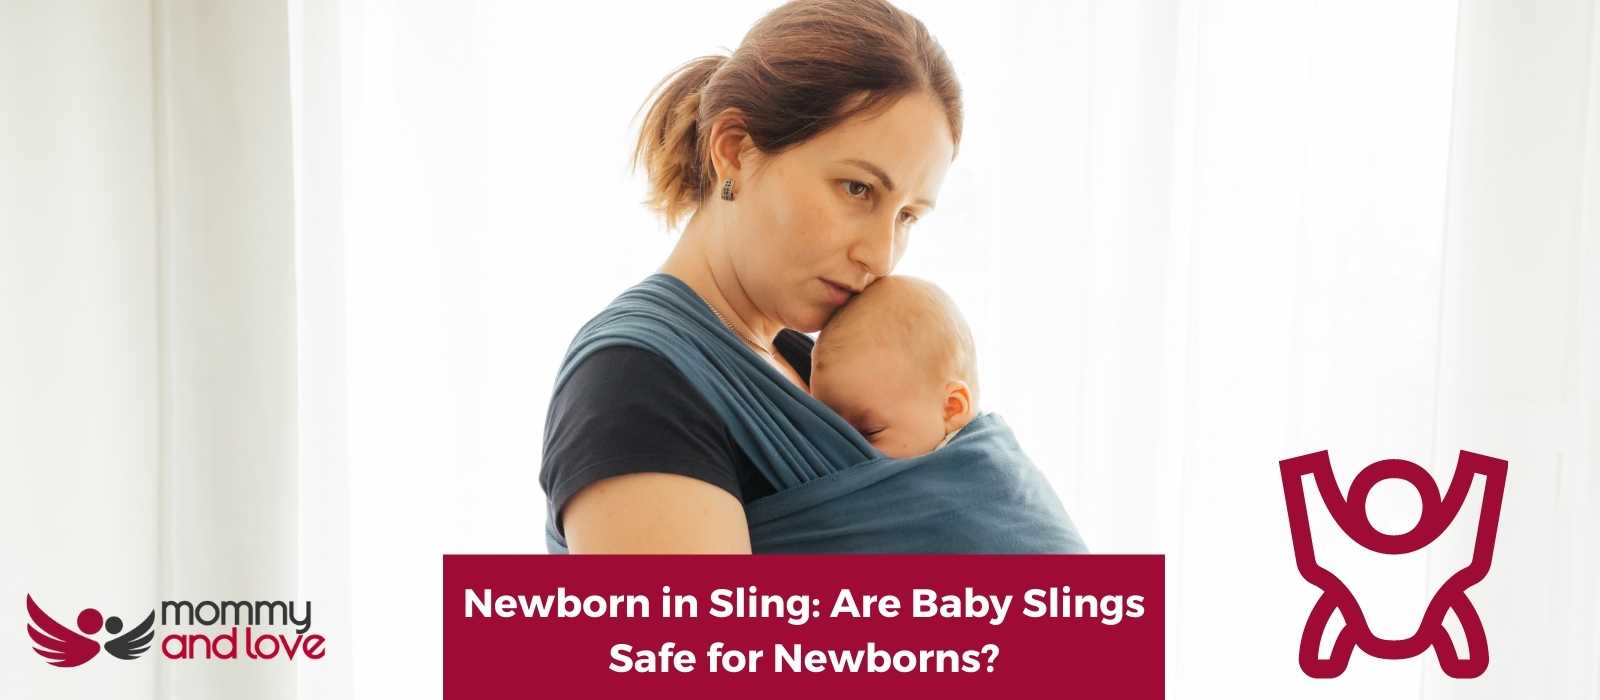 Newborn in Sling Are Baby Slings Safe for Newborns